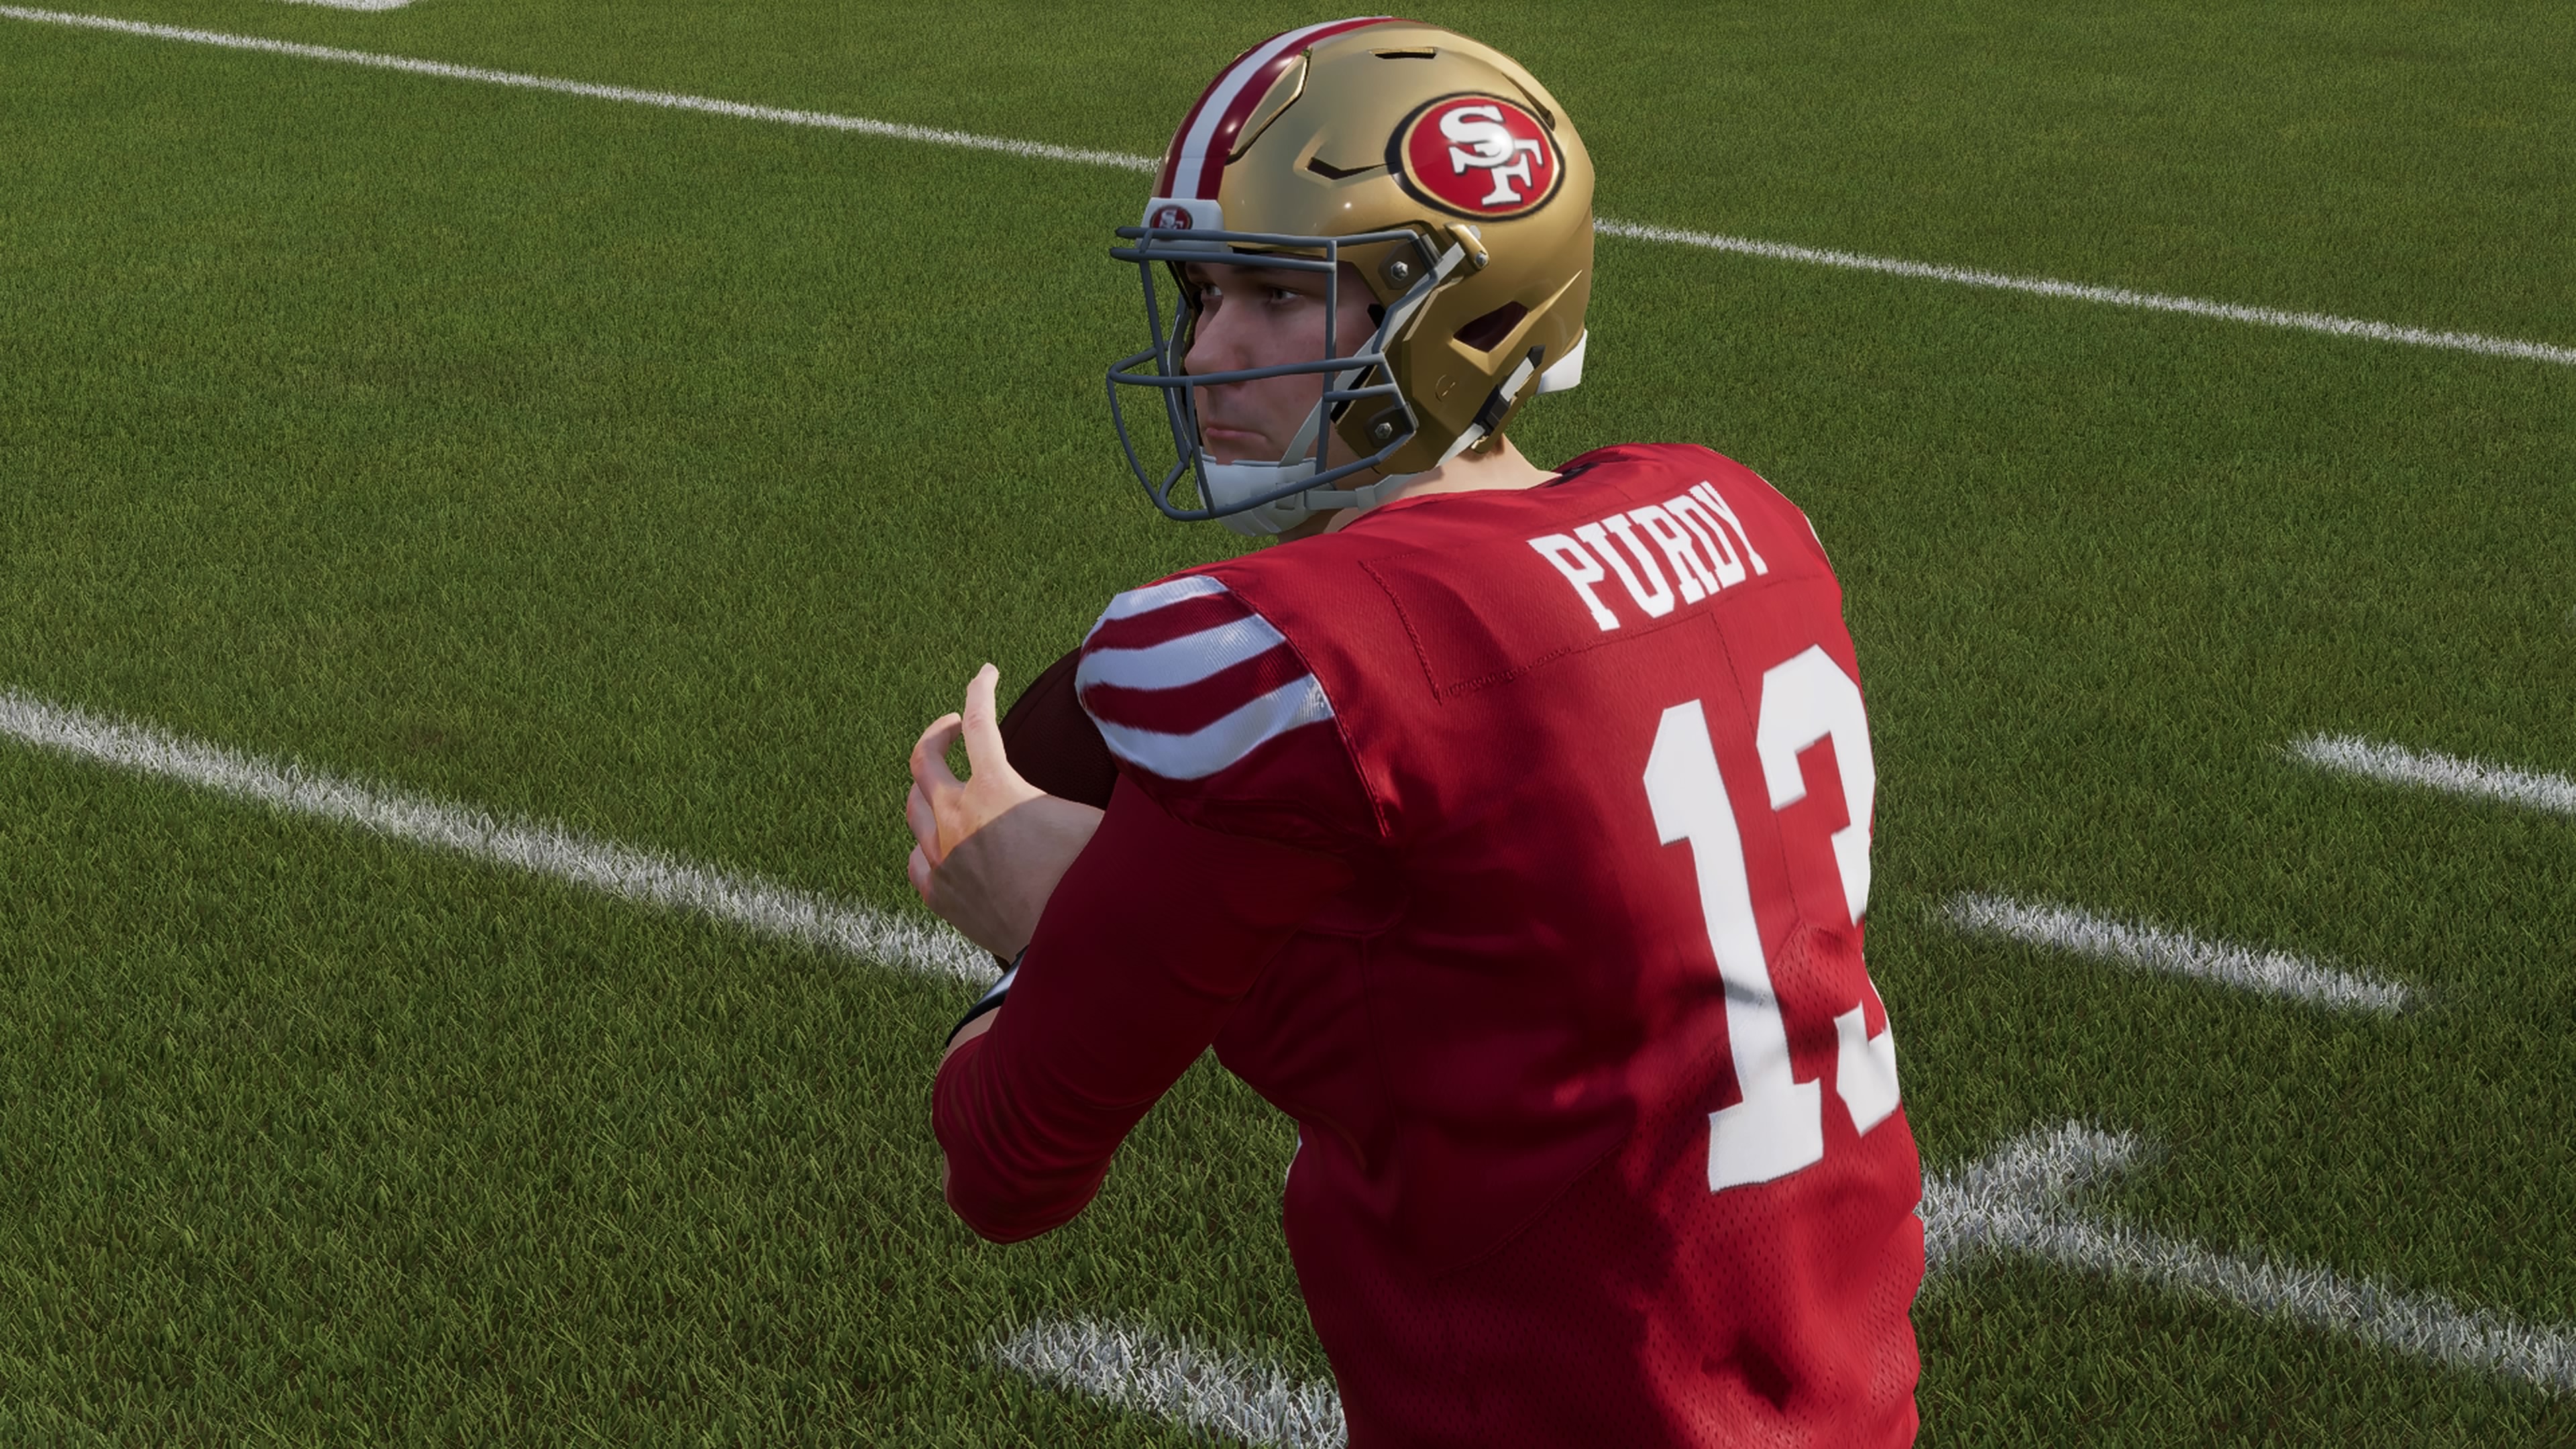 The Best Young Players to Trade for in Madden 23